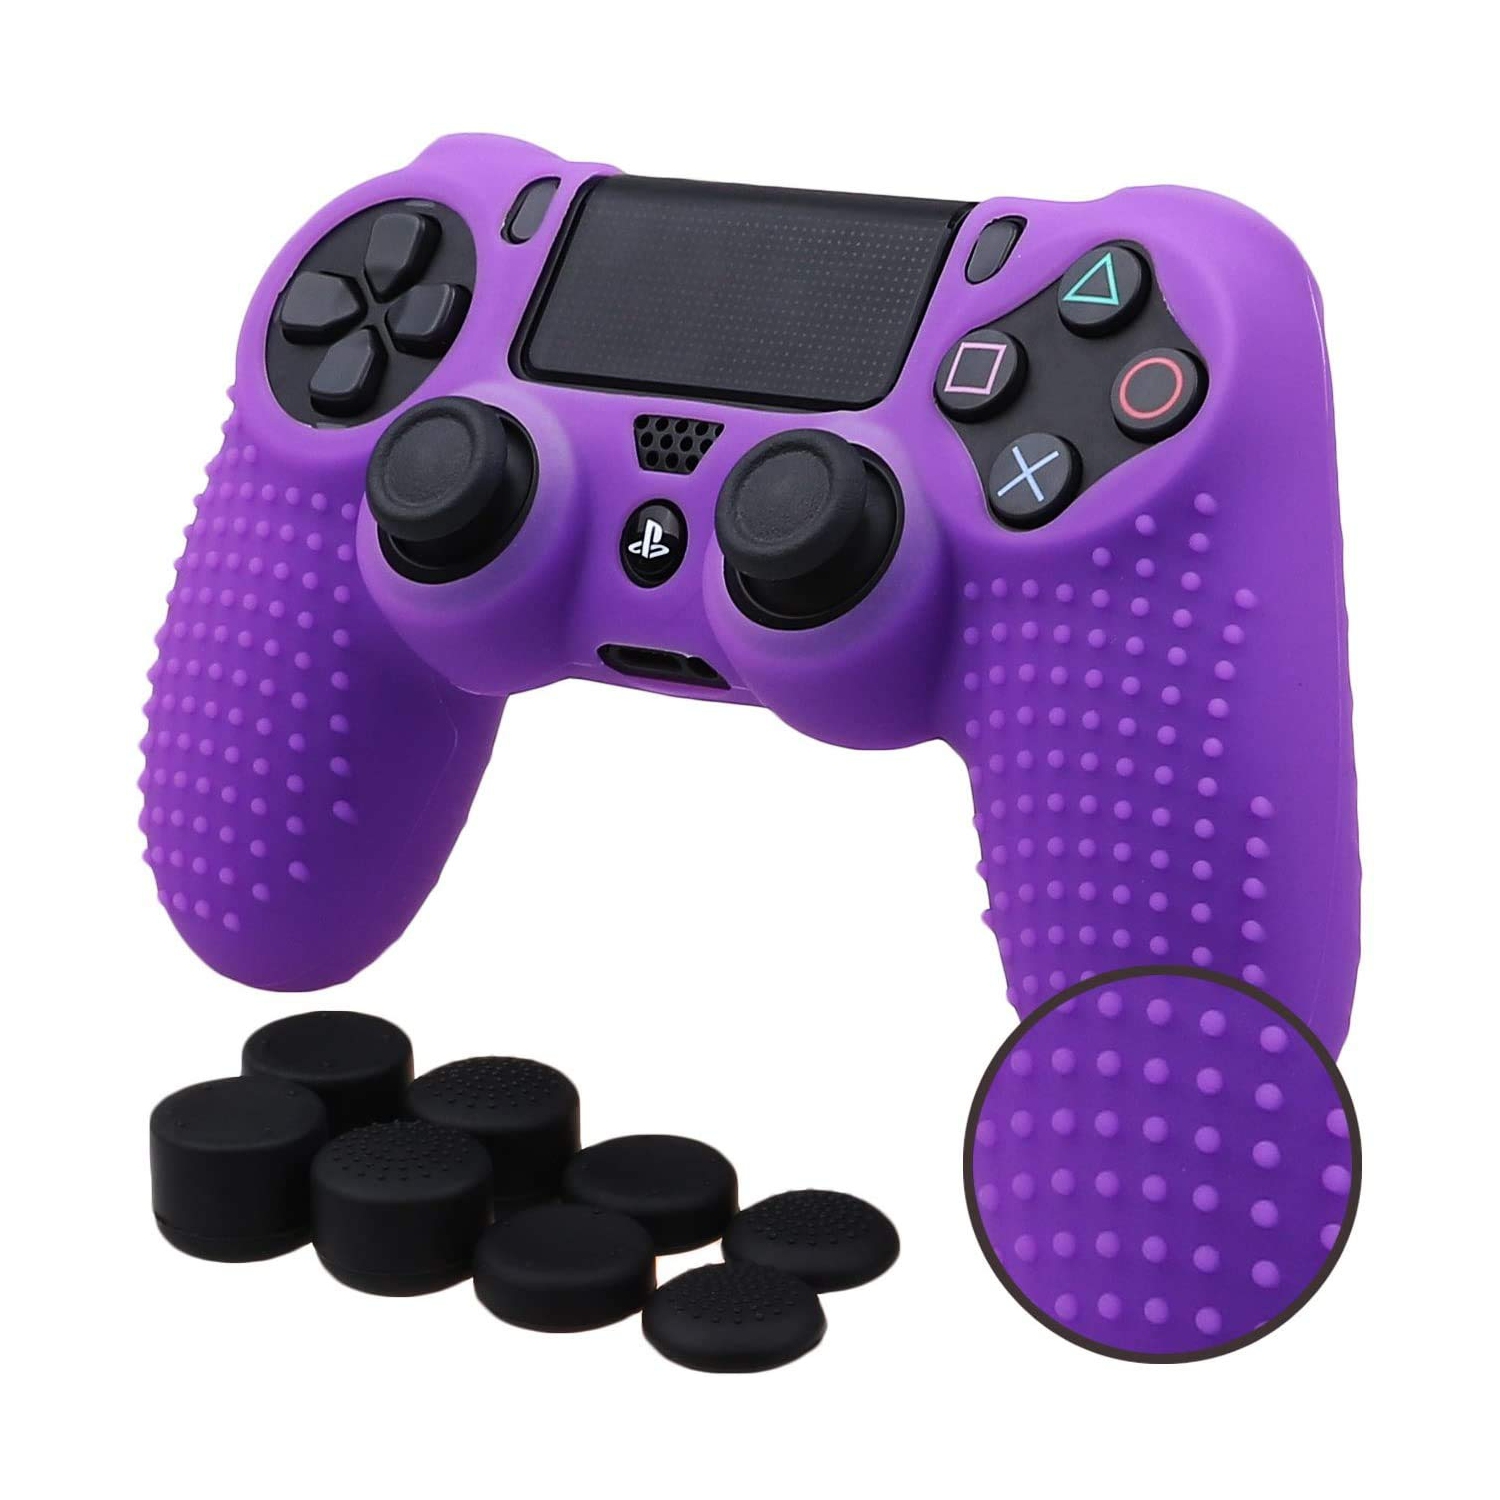 YoRHa Studded Silicone Cover Skin Case for Sony PS4/slim/Pro Dualshock 4 controller x 1(purple) With Pro thumb grips x 8